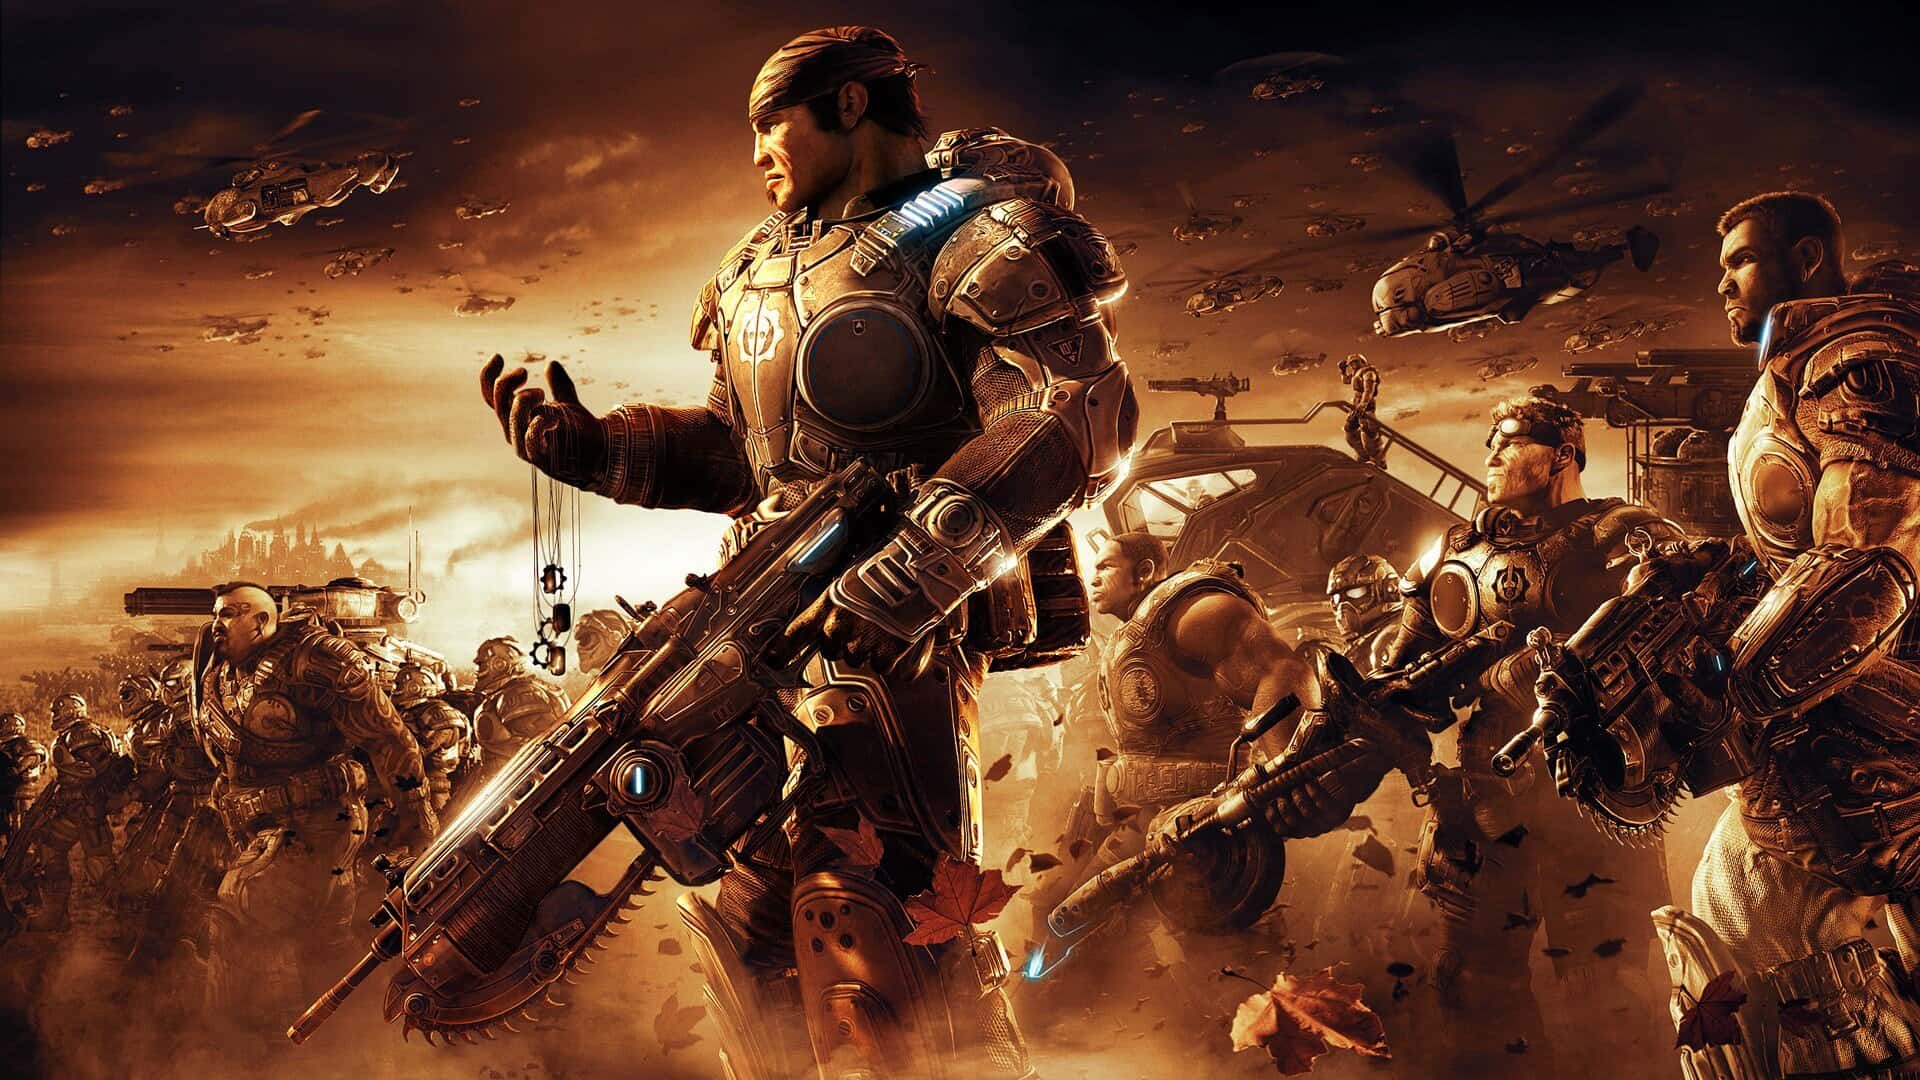 Looking Back to 2011 with Gears of War 3 - Finishing the Fight (for a  while)